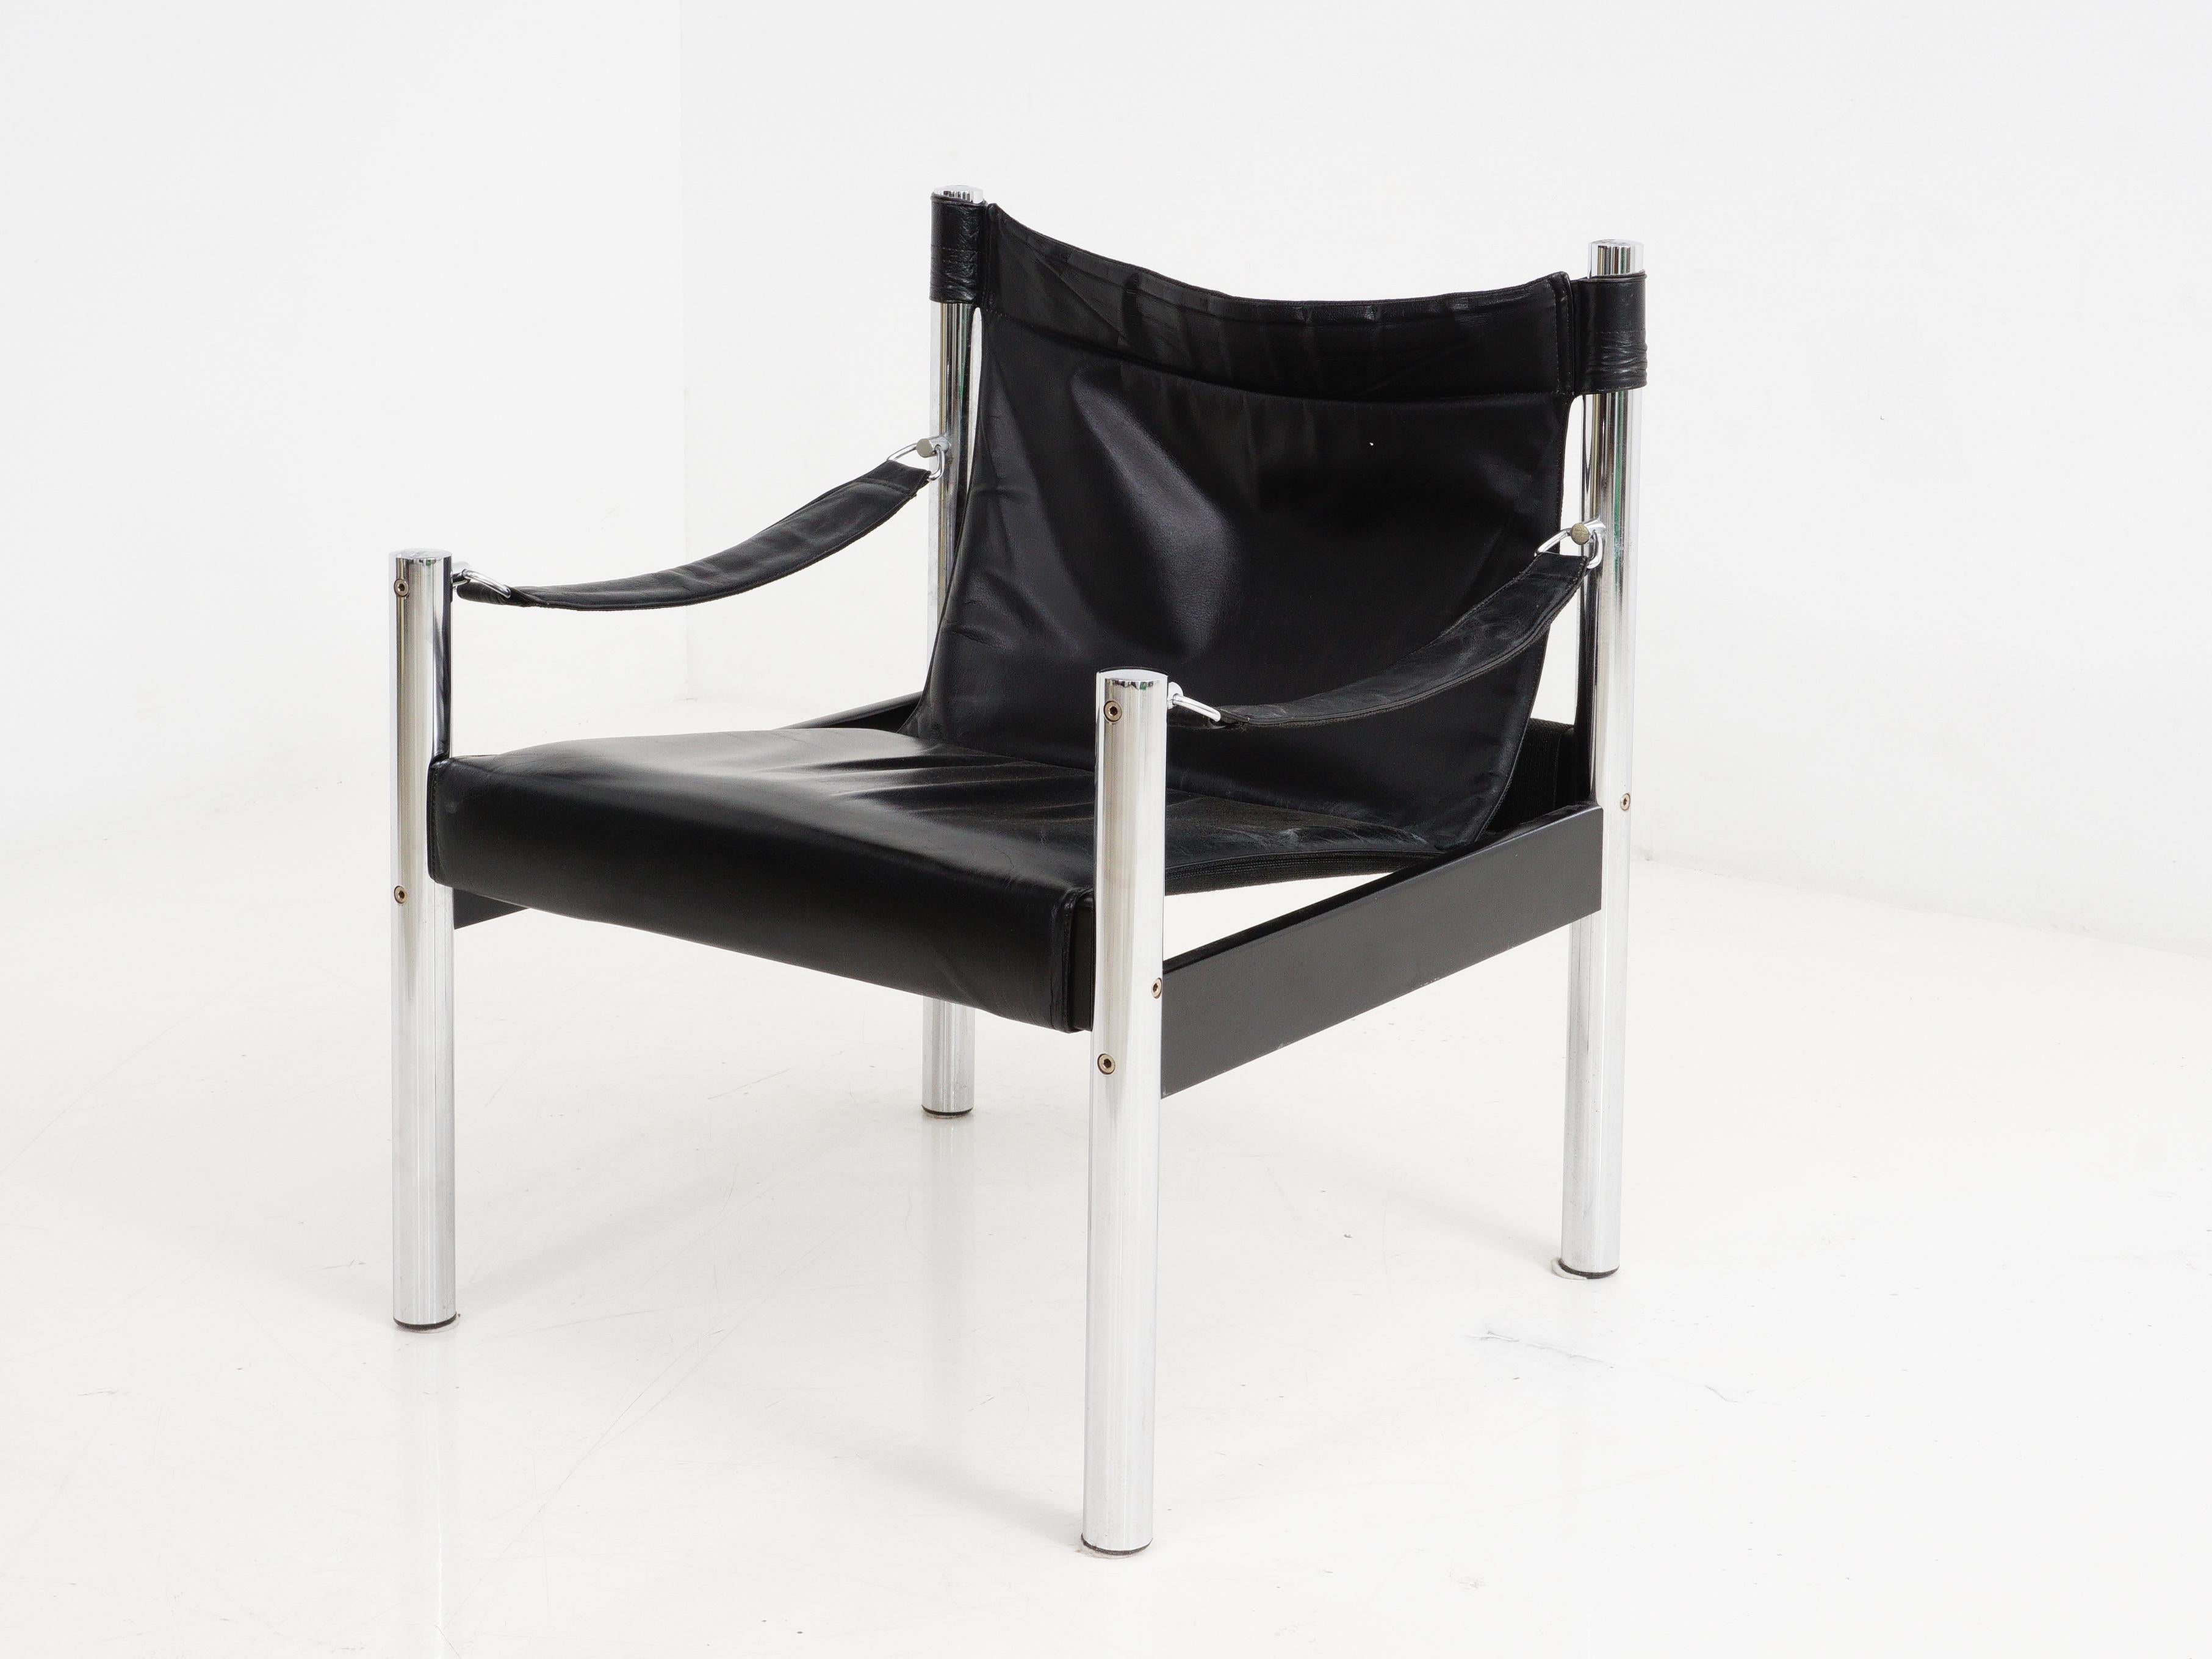 Meet the Safari Chair by Johanson Design: black leather and chrome in perfect harmony. It's classy and modern, like the James Bond of chairs. Designed for adventures, it's both sophisticated and ready for action. Upgrade your seating game with a